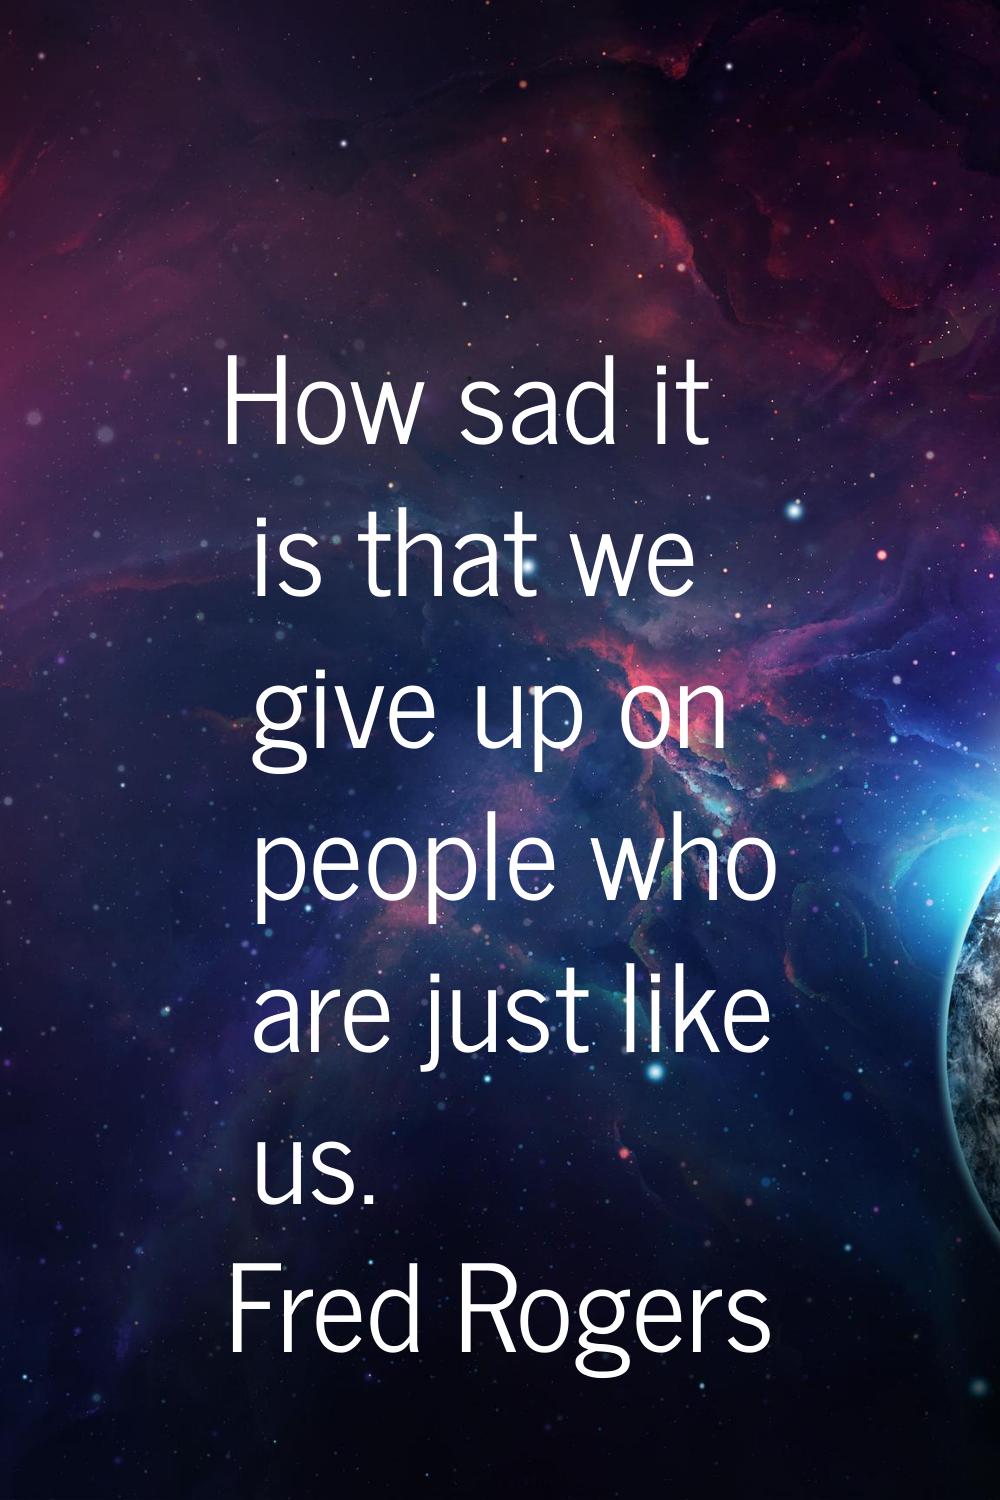 How sad it is that we give up on people who are just like us.